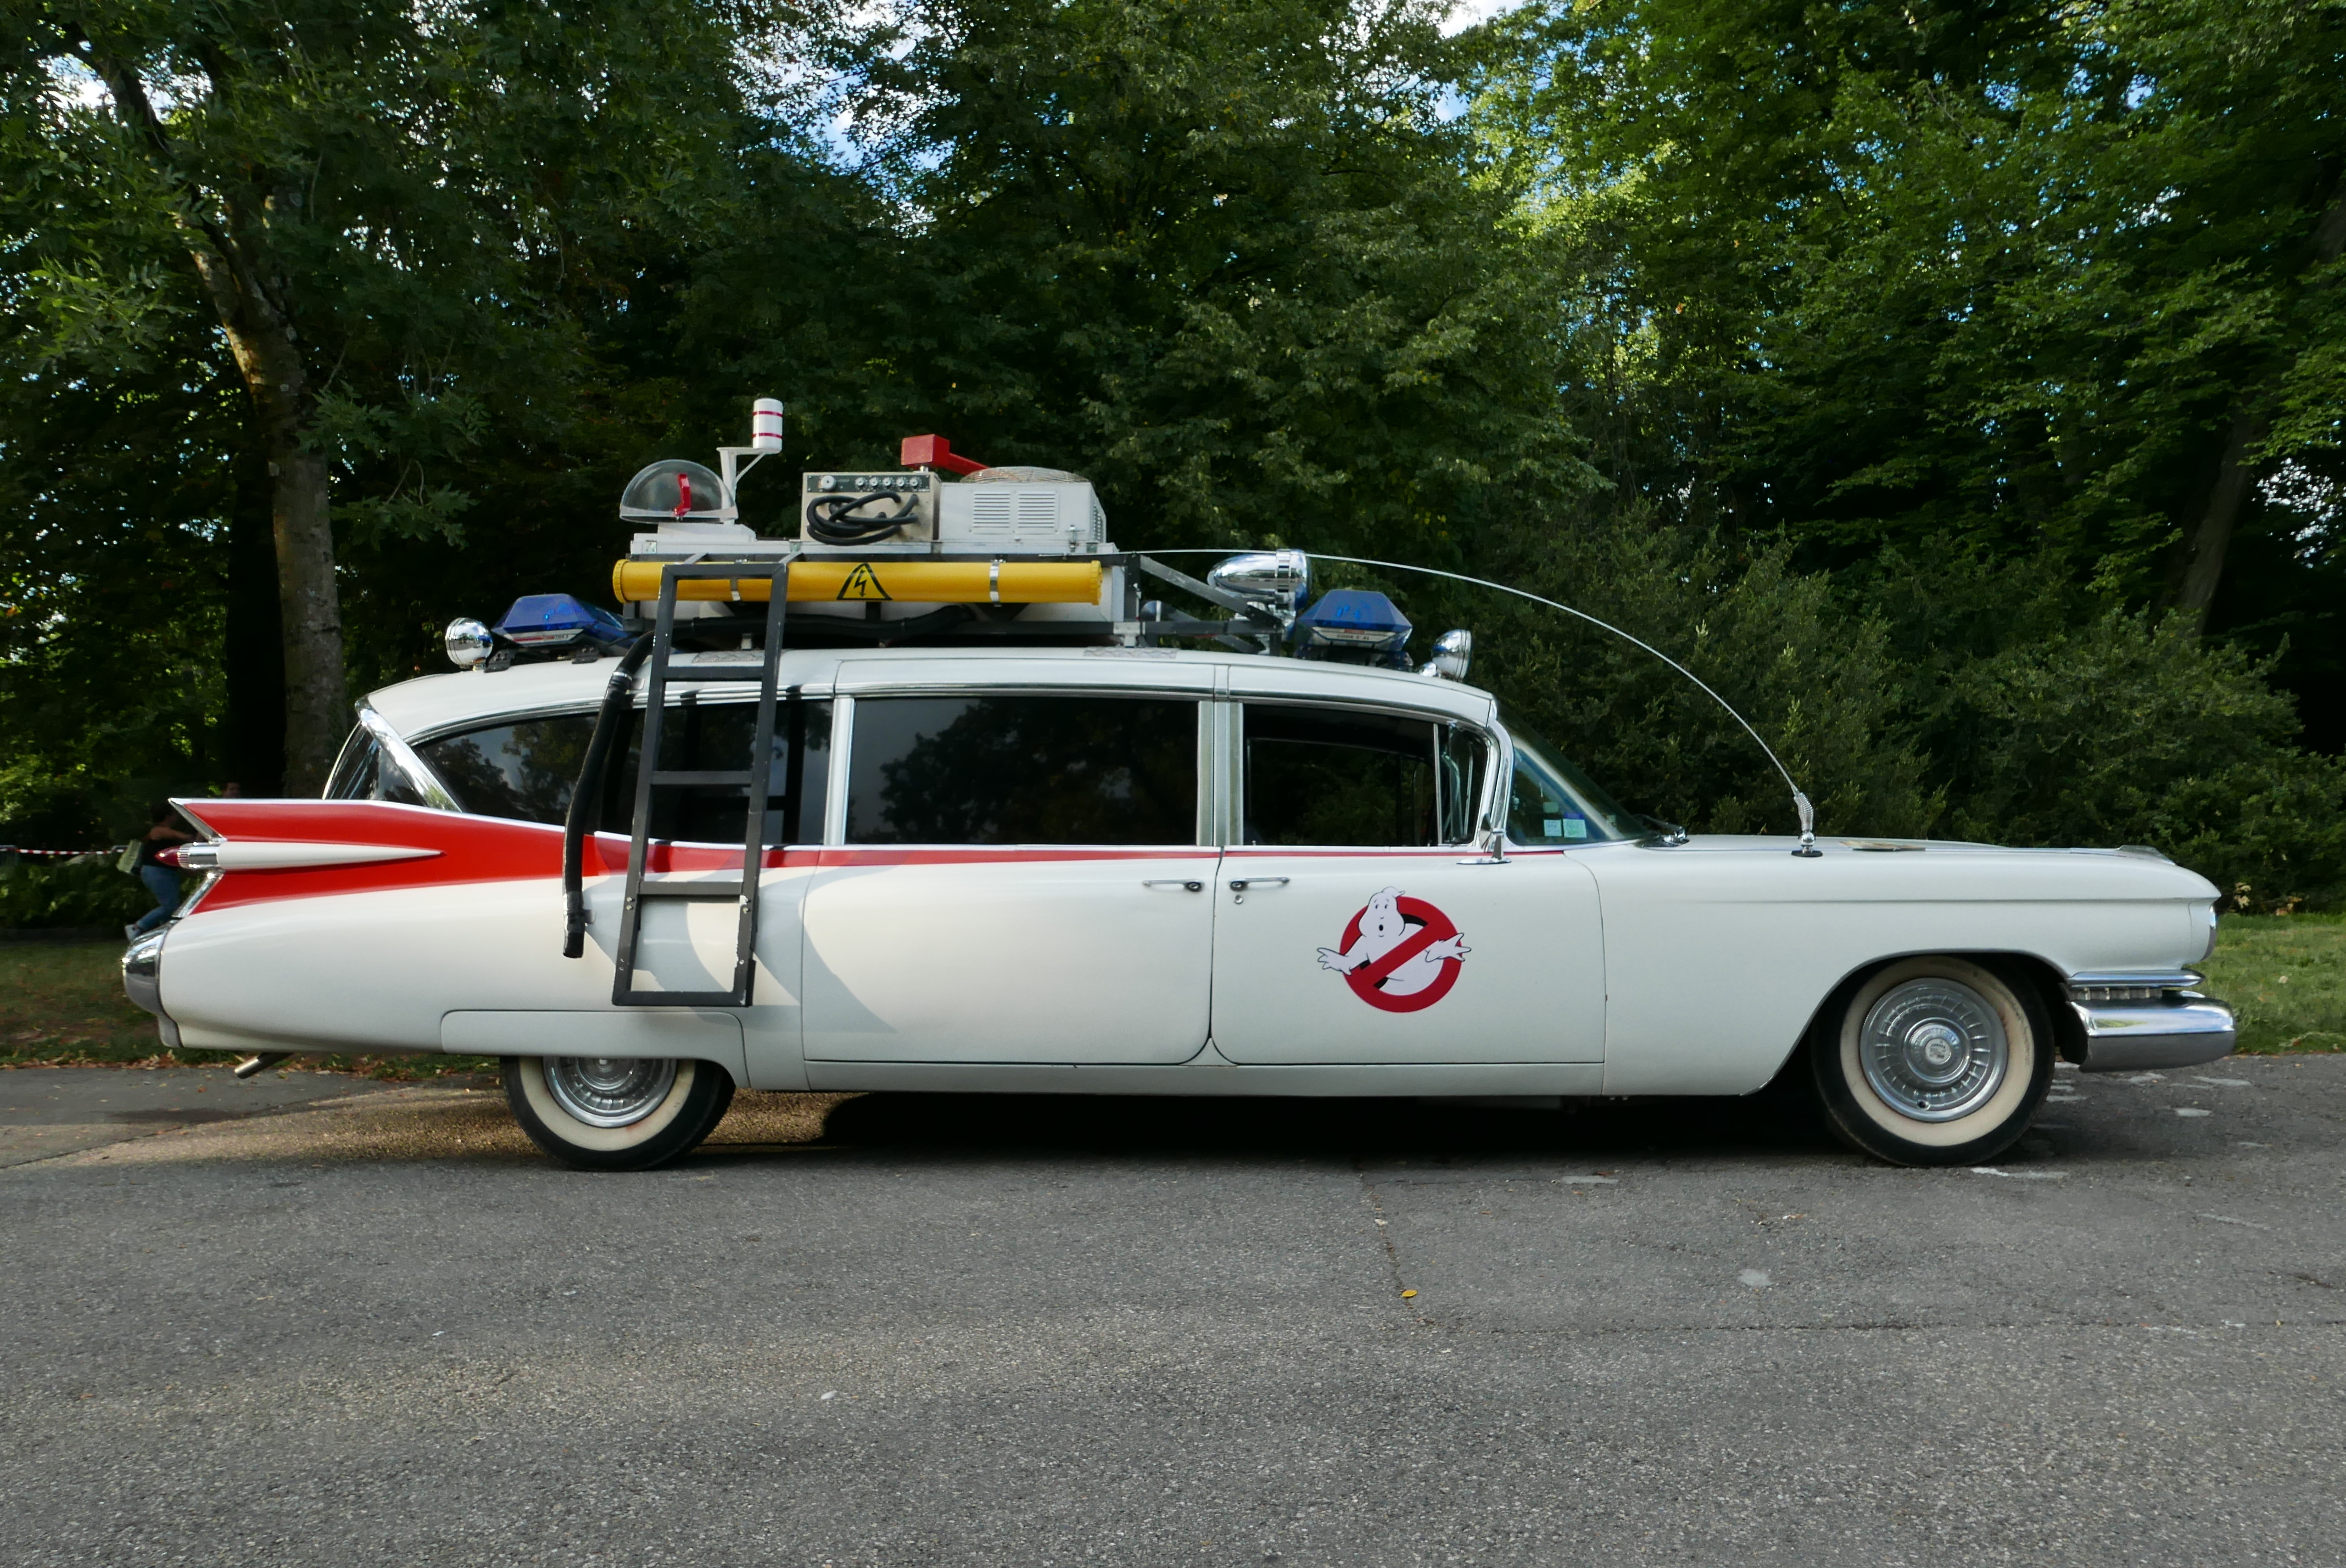 Ecto-1 from "Ghostbusters"